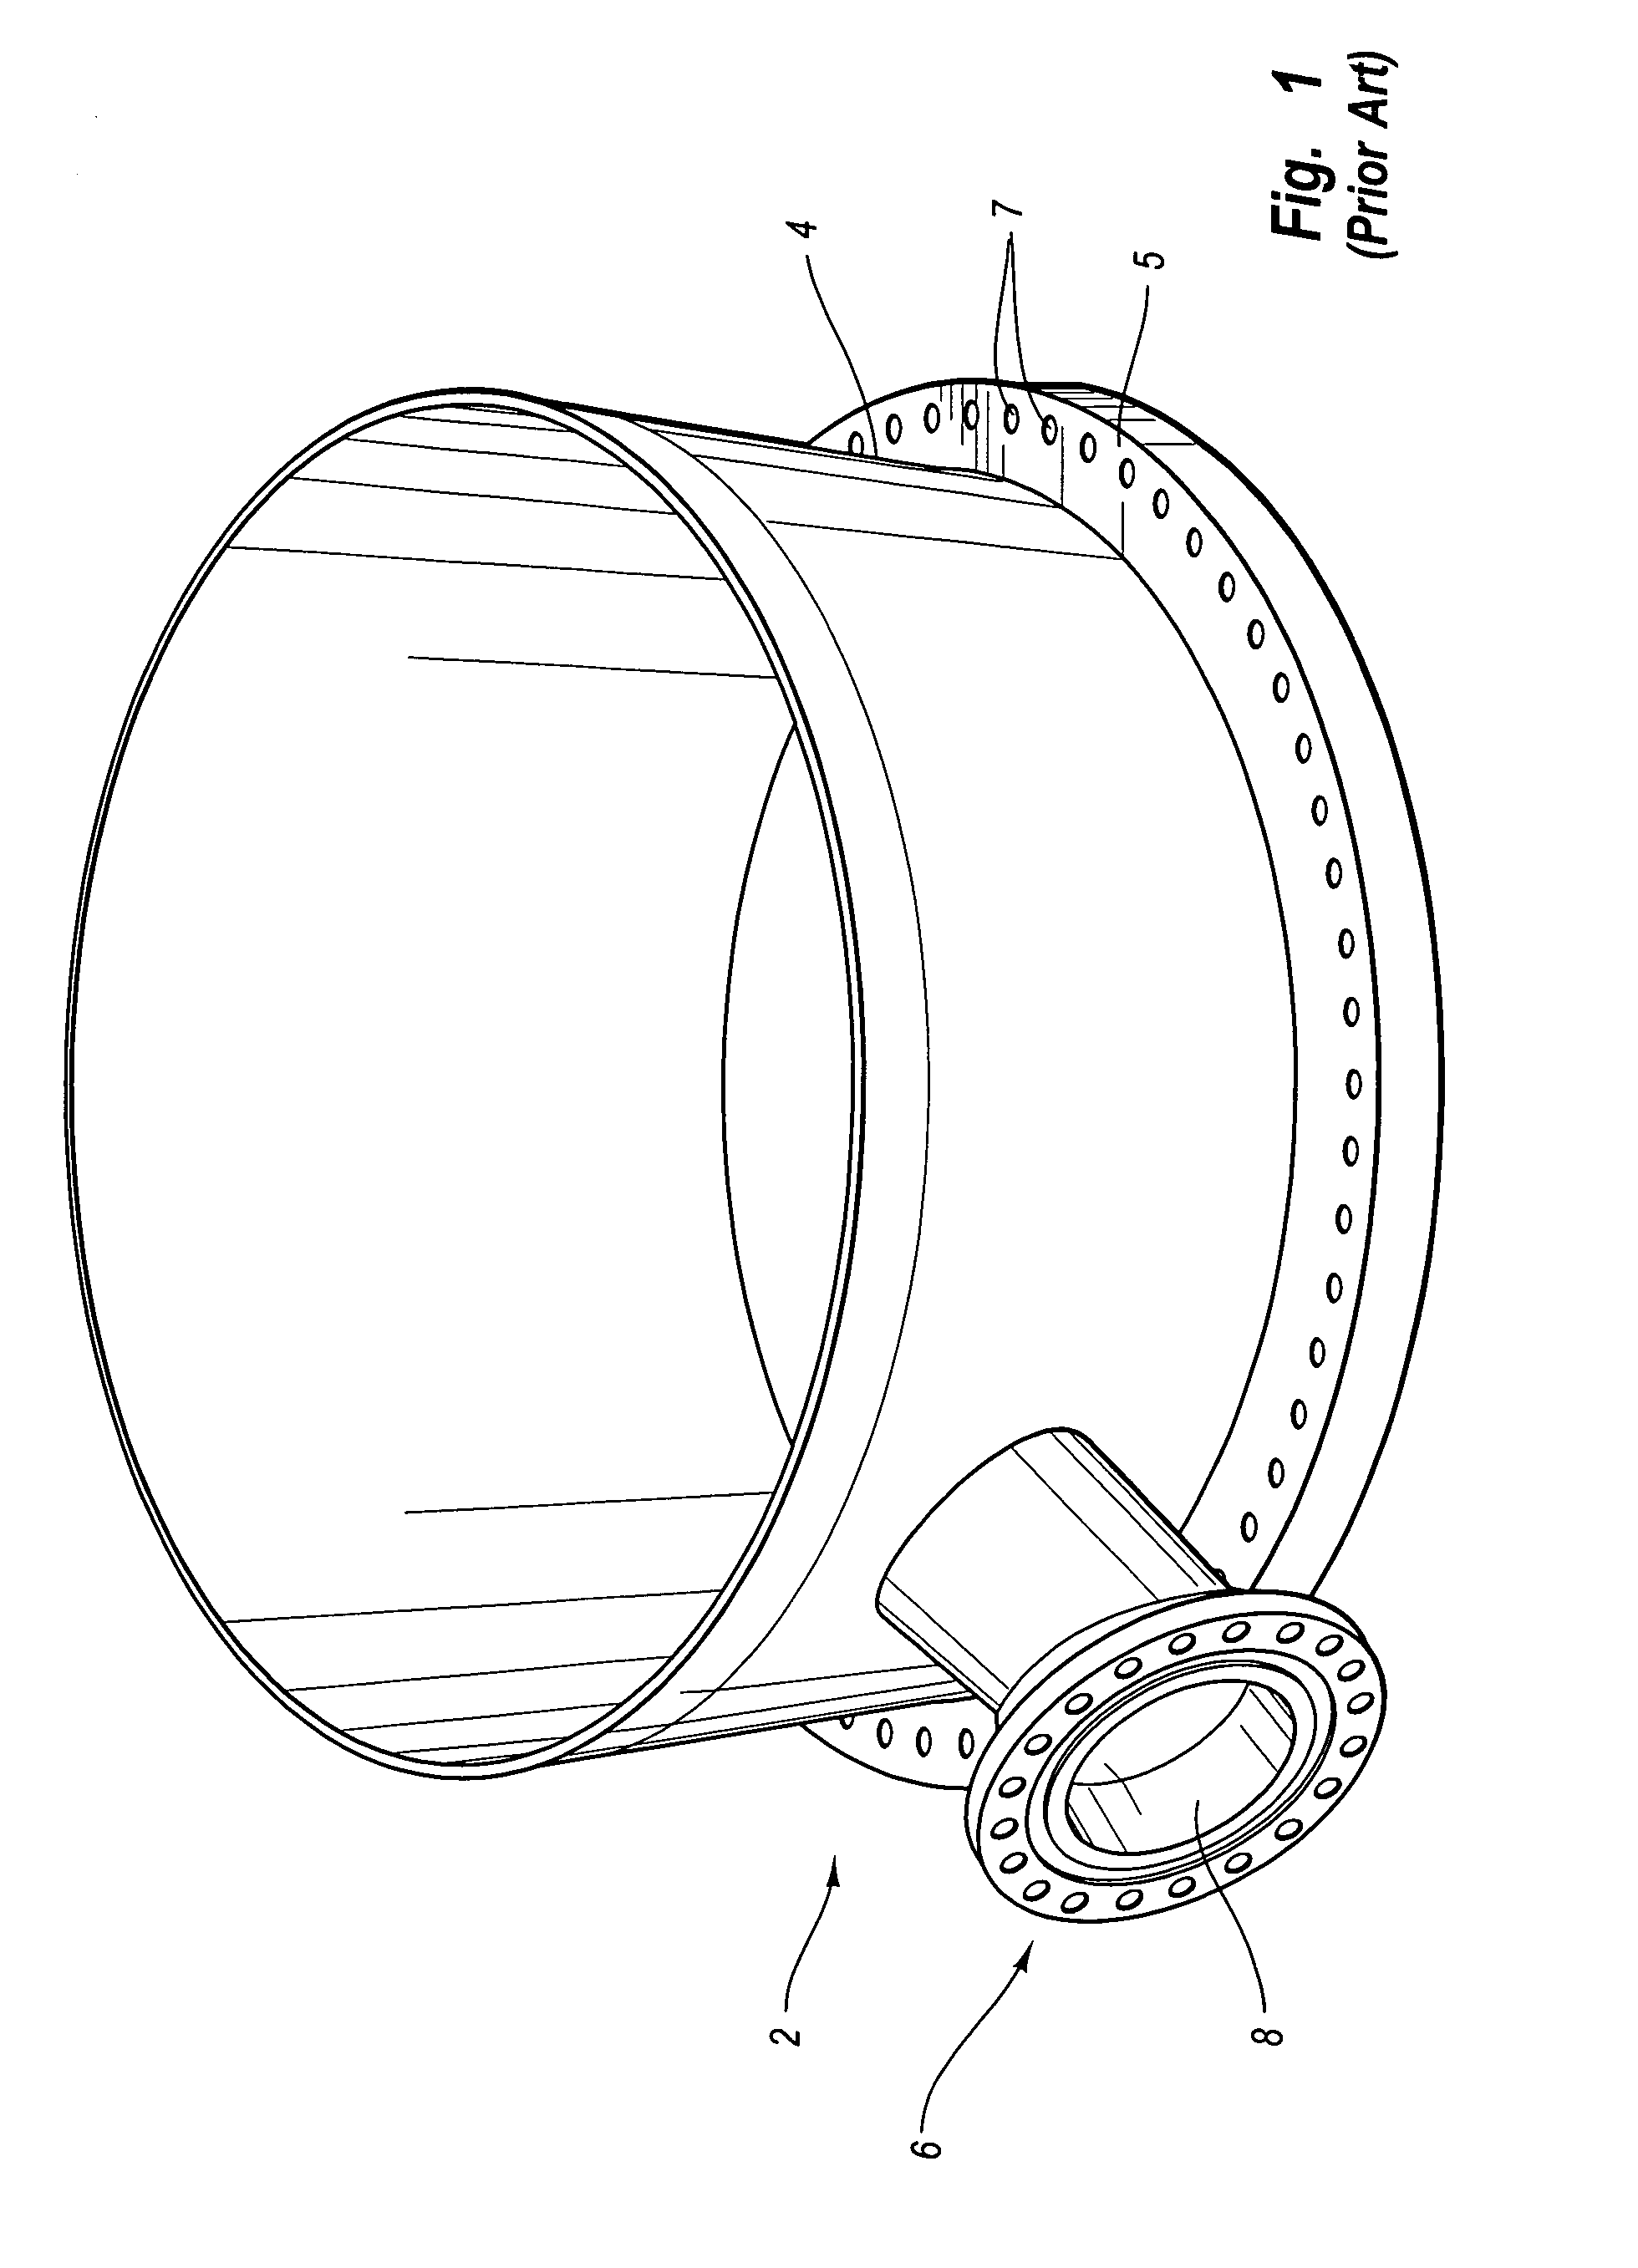 Tangential dispenser and system for use within a delayed coking system